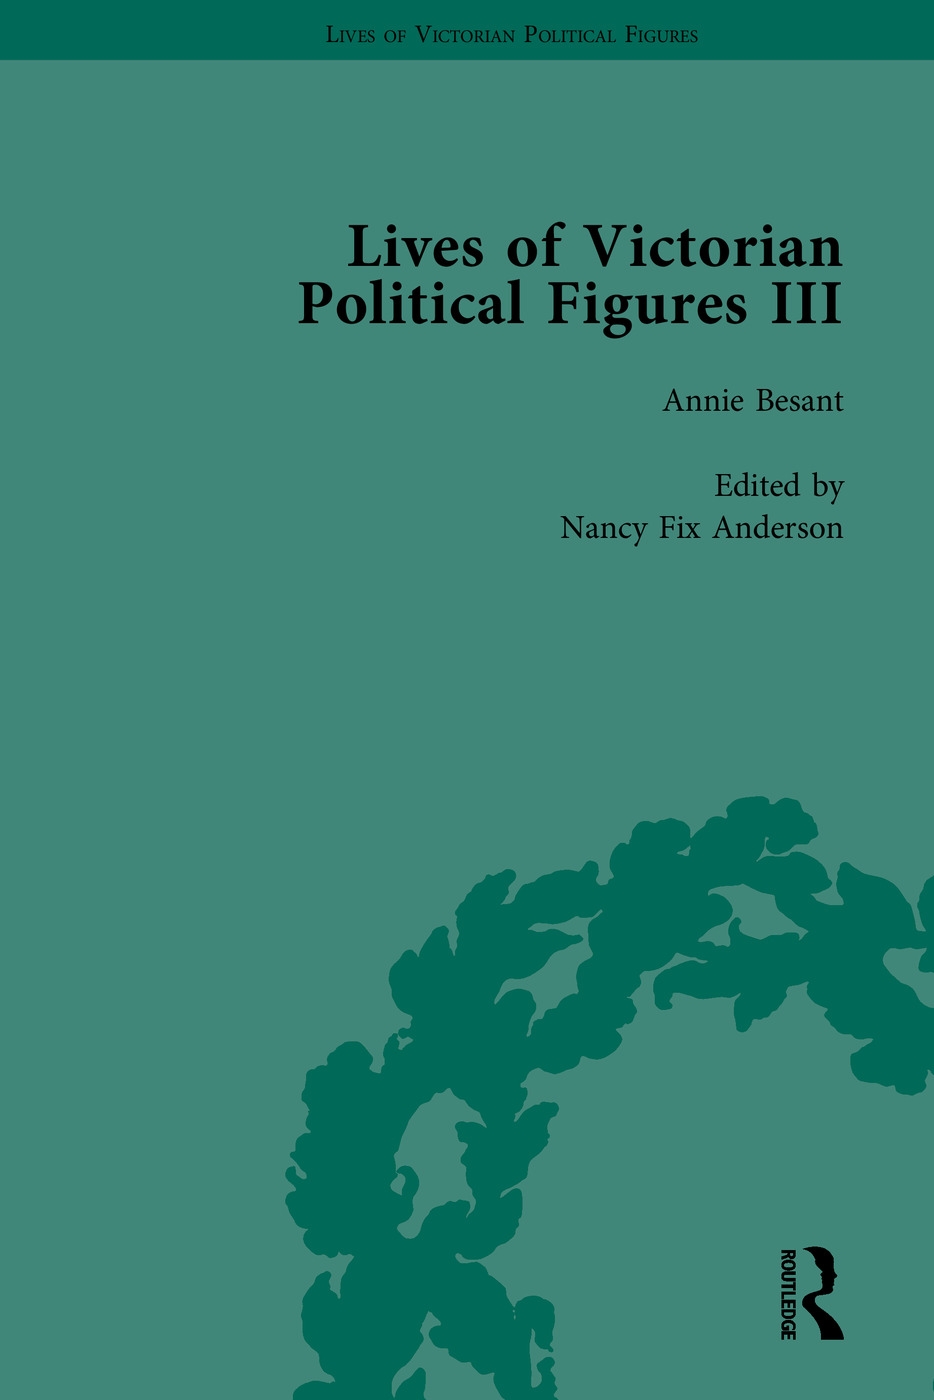 Lives of Victorian Political Figures, Part III: Queen Victoria, Florence Nightingale, Annie Besant and Millicent Garrett Fawcett by Their Contemporari